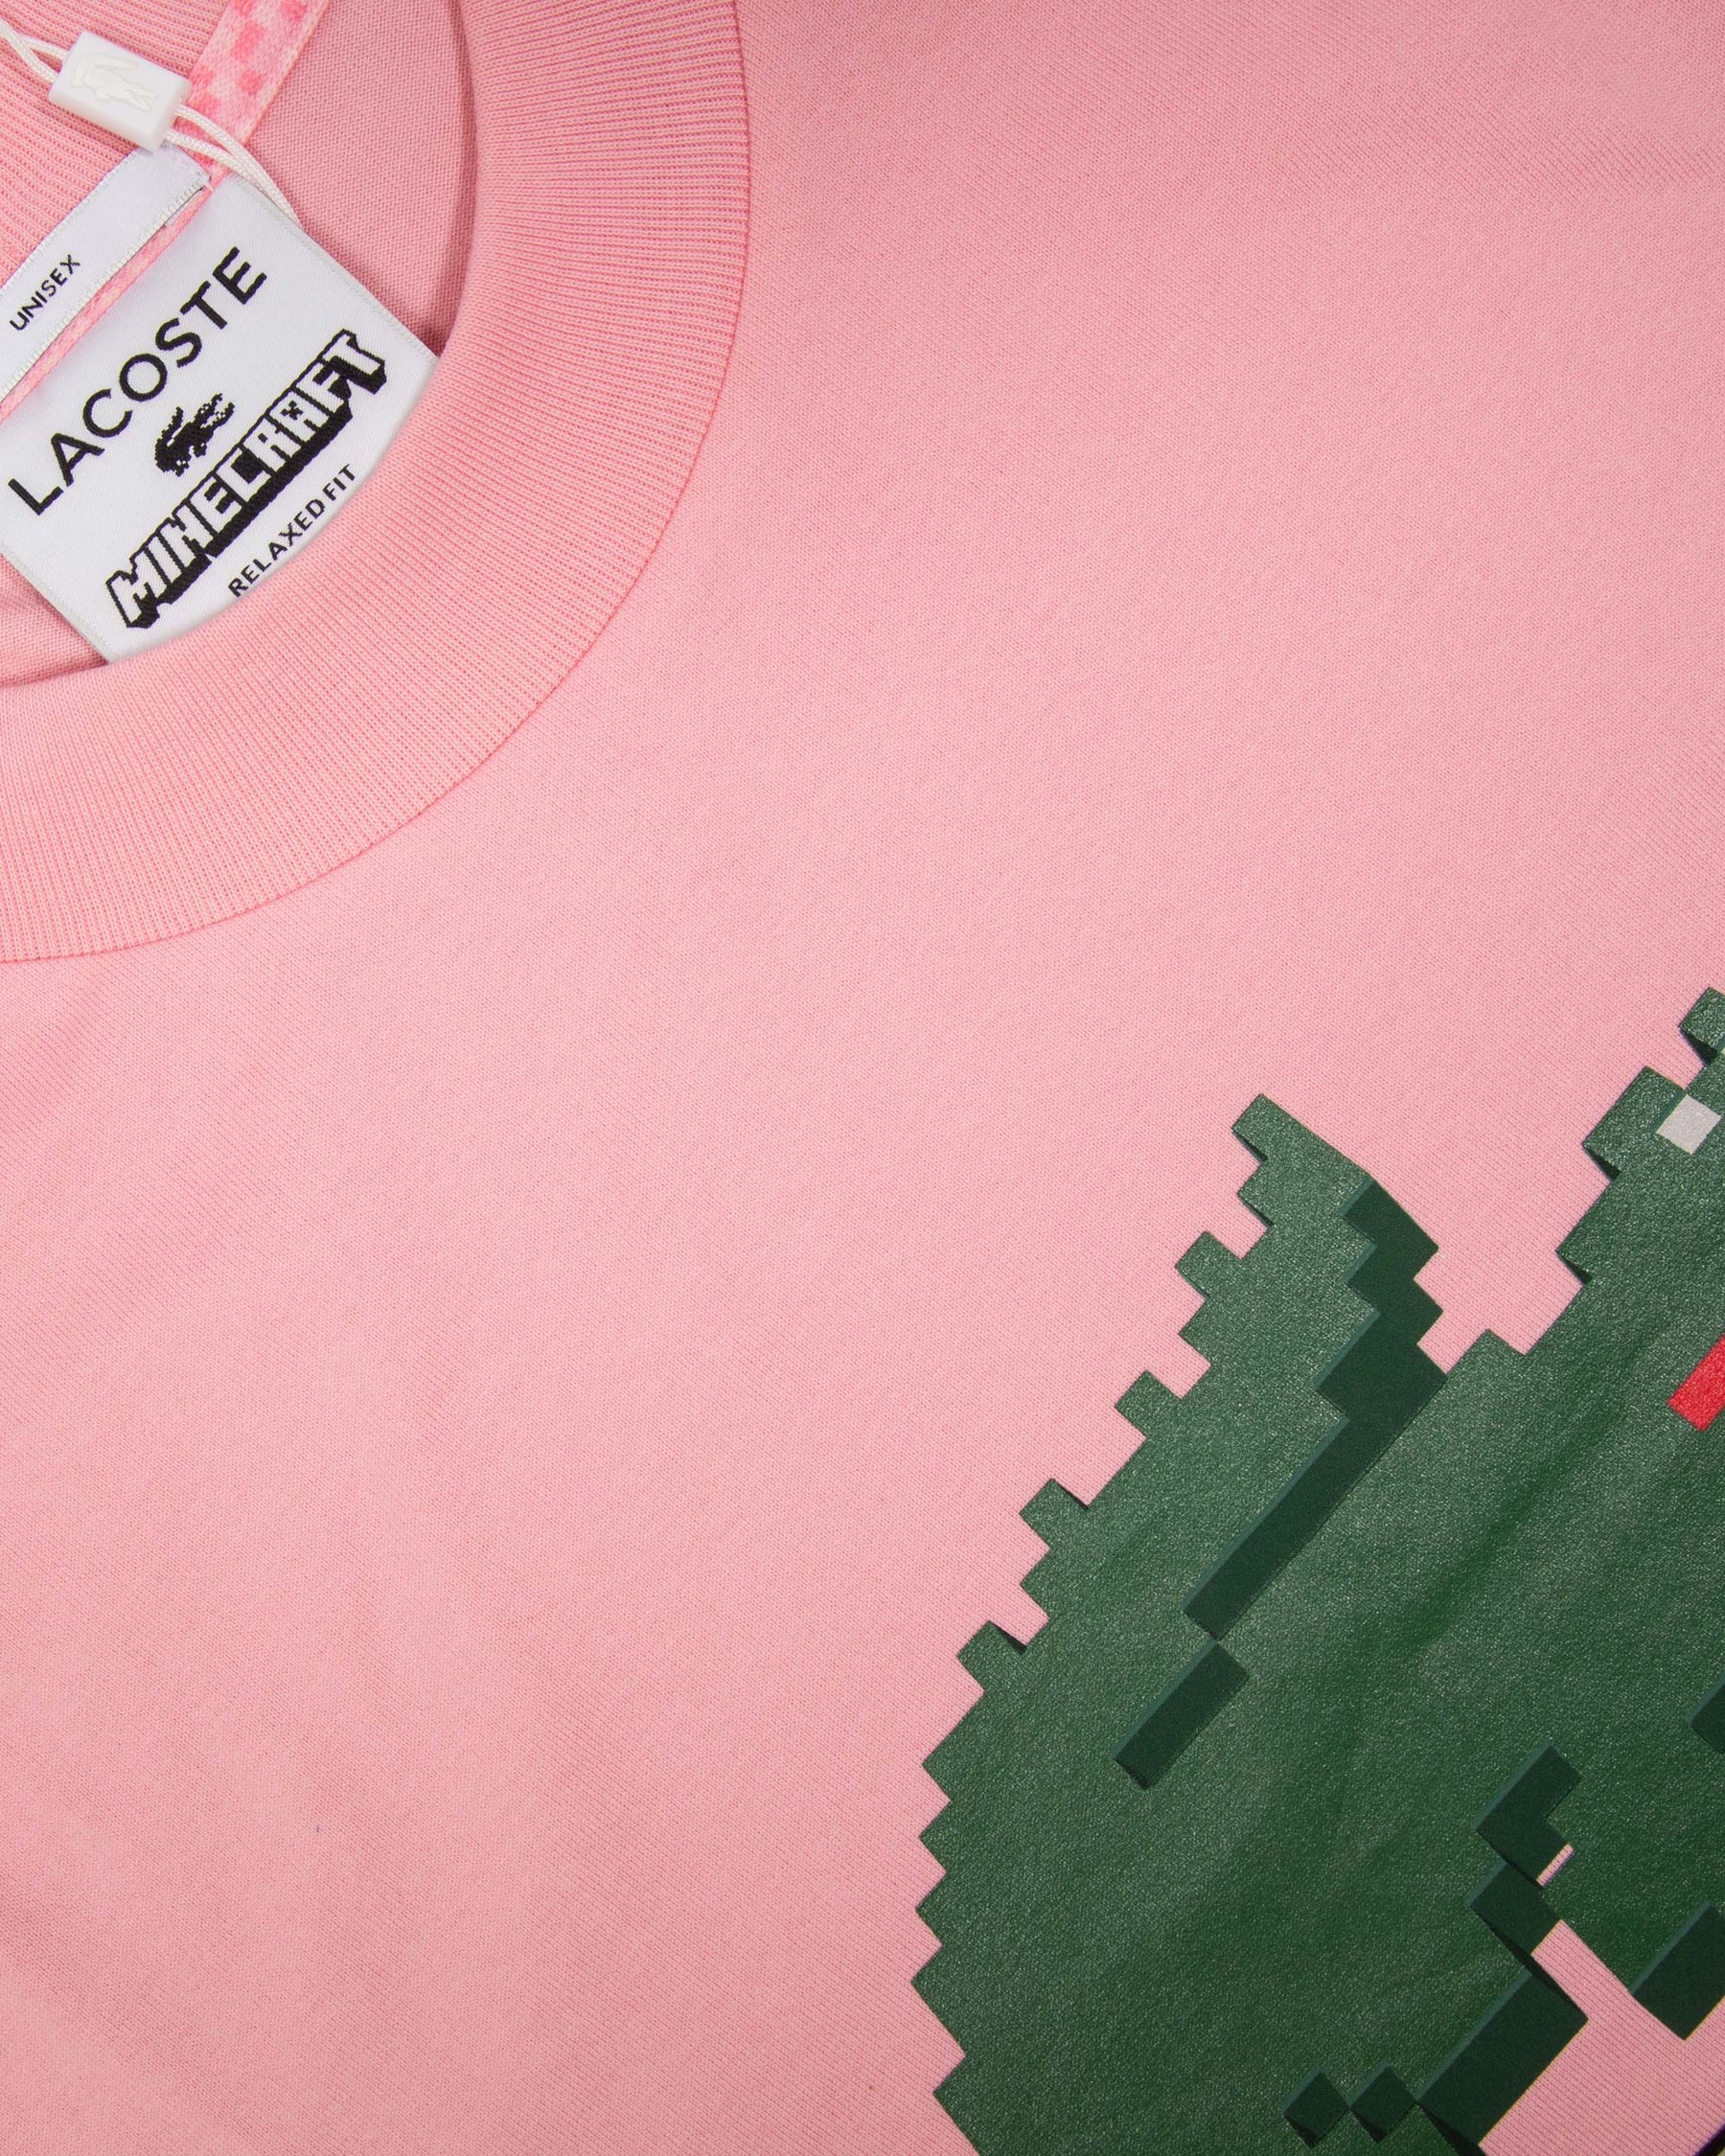 Lacoste Lacoste Live X Minecraft T-Shirt XS at FORZIERI